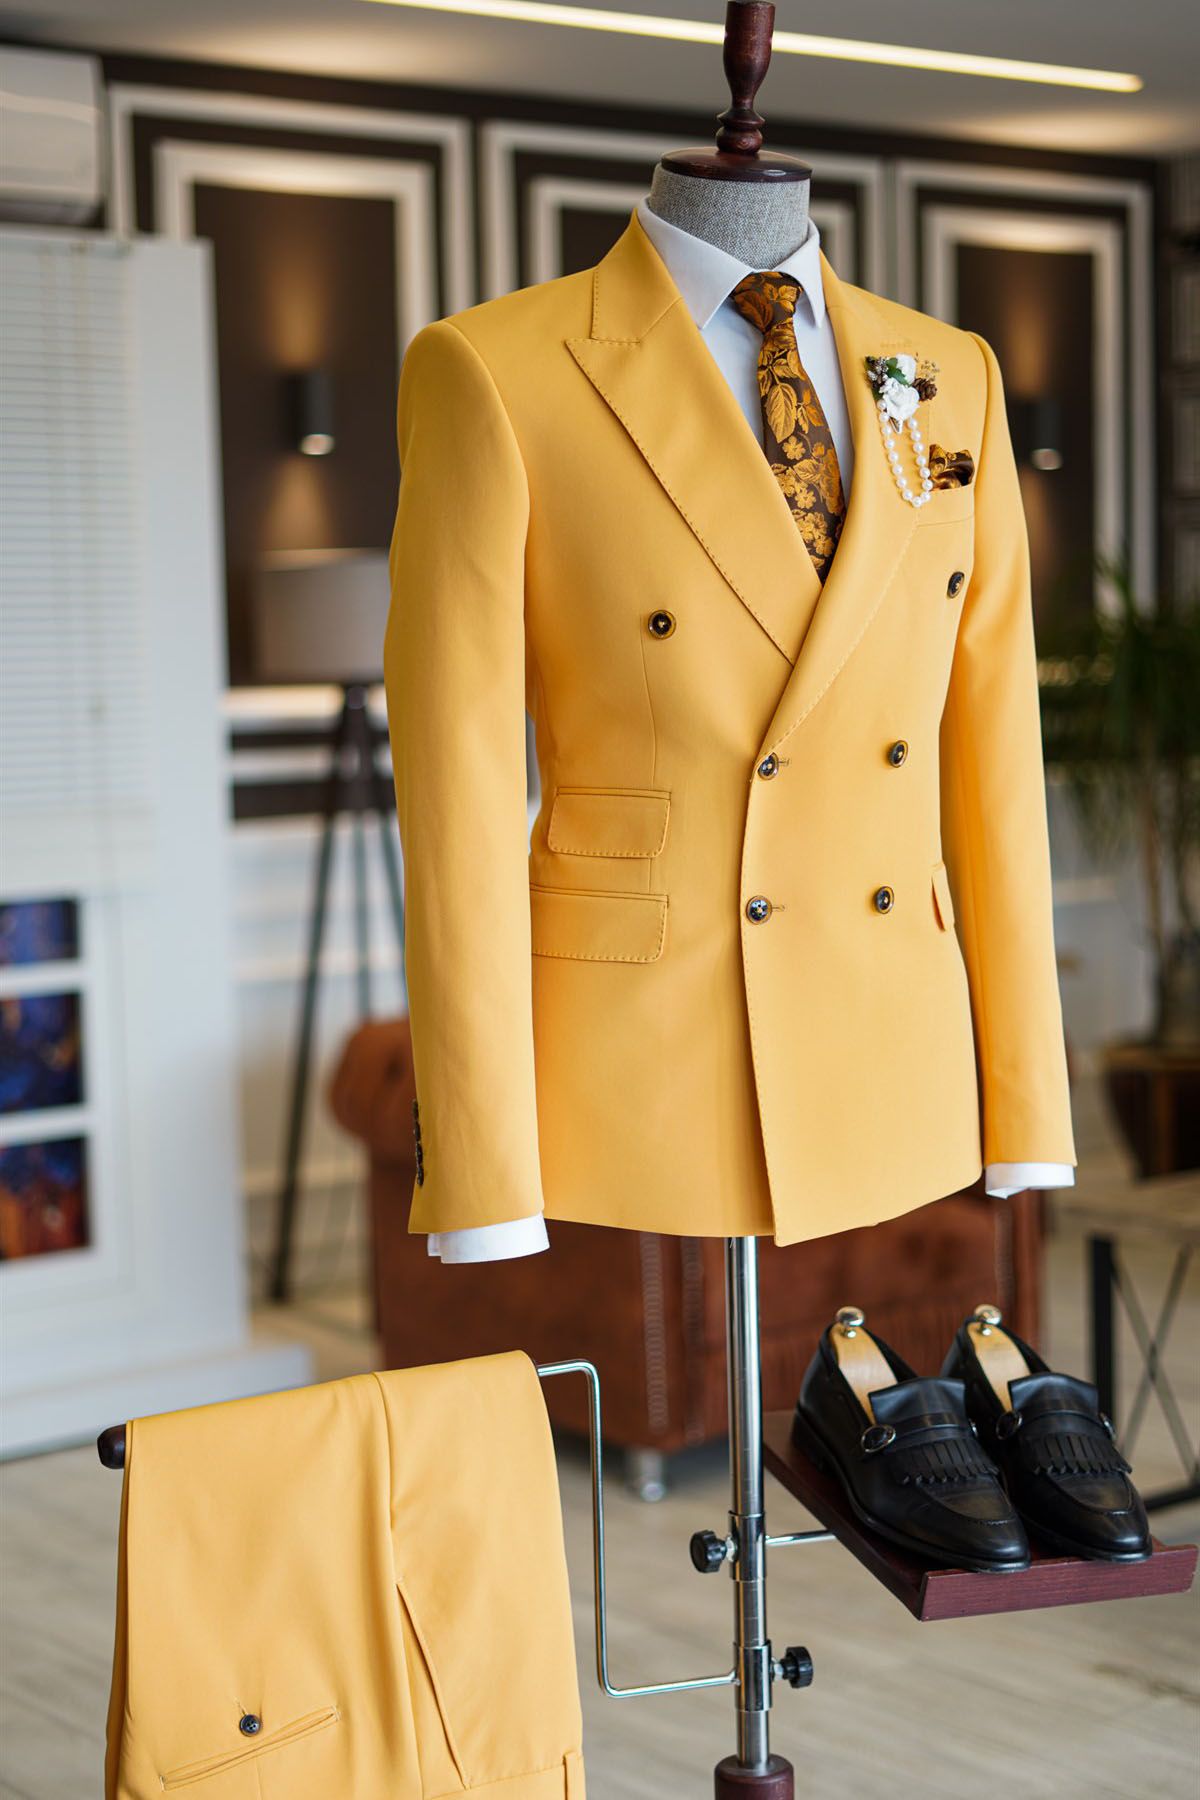 Dresseswow Chic Yellow Double Breasted Bepoke Party Prom Suits With Peaked Lapel